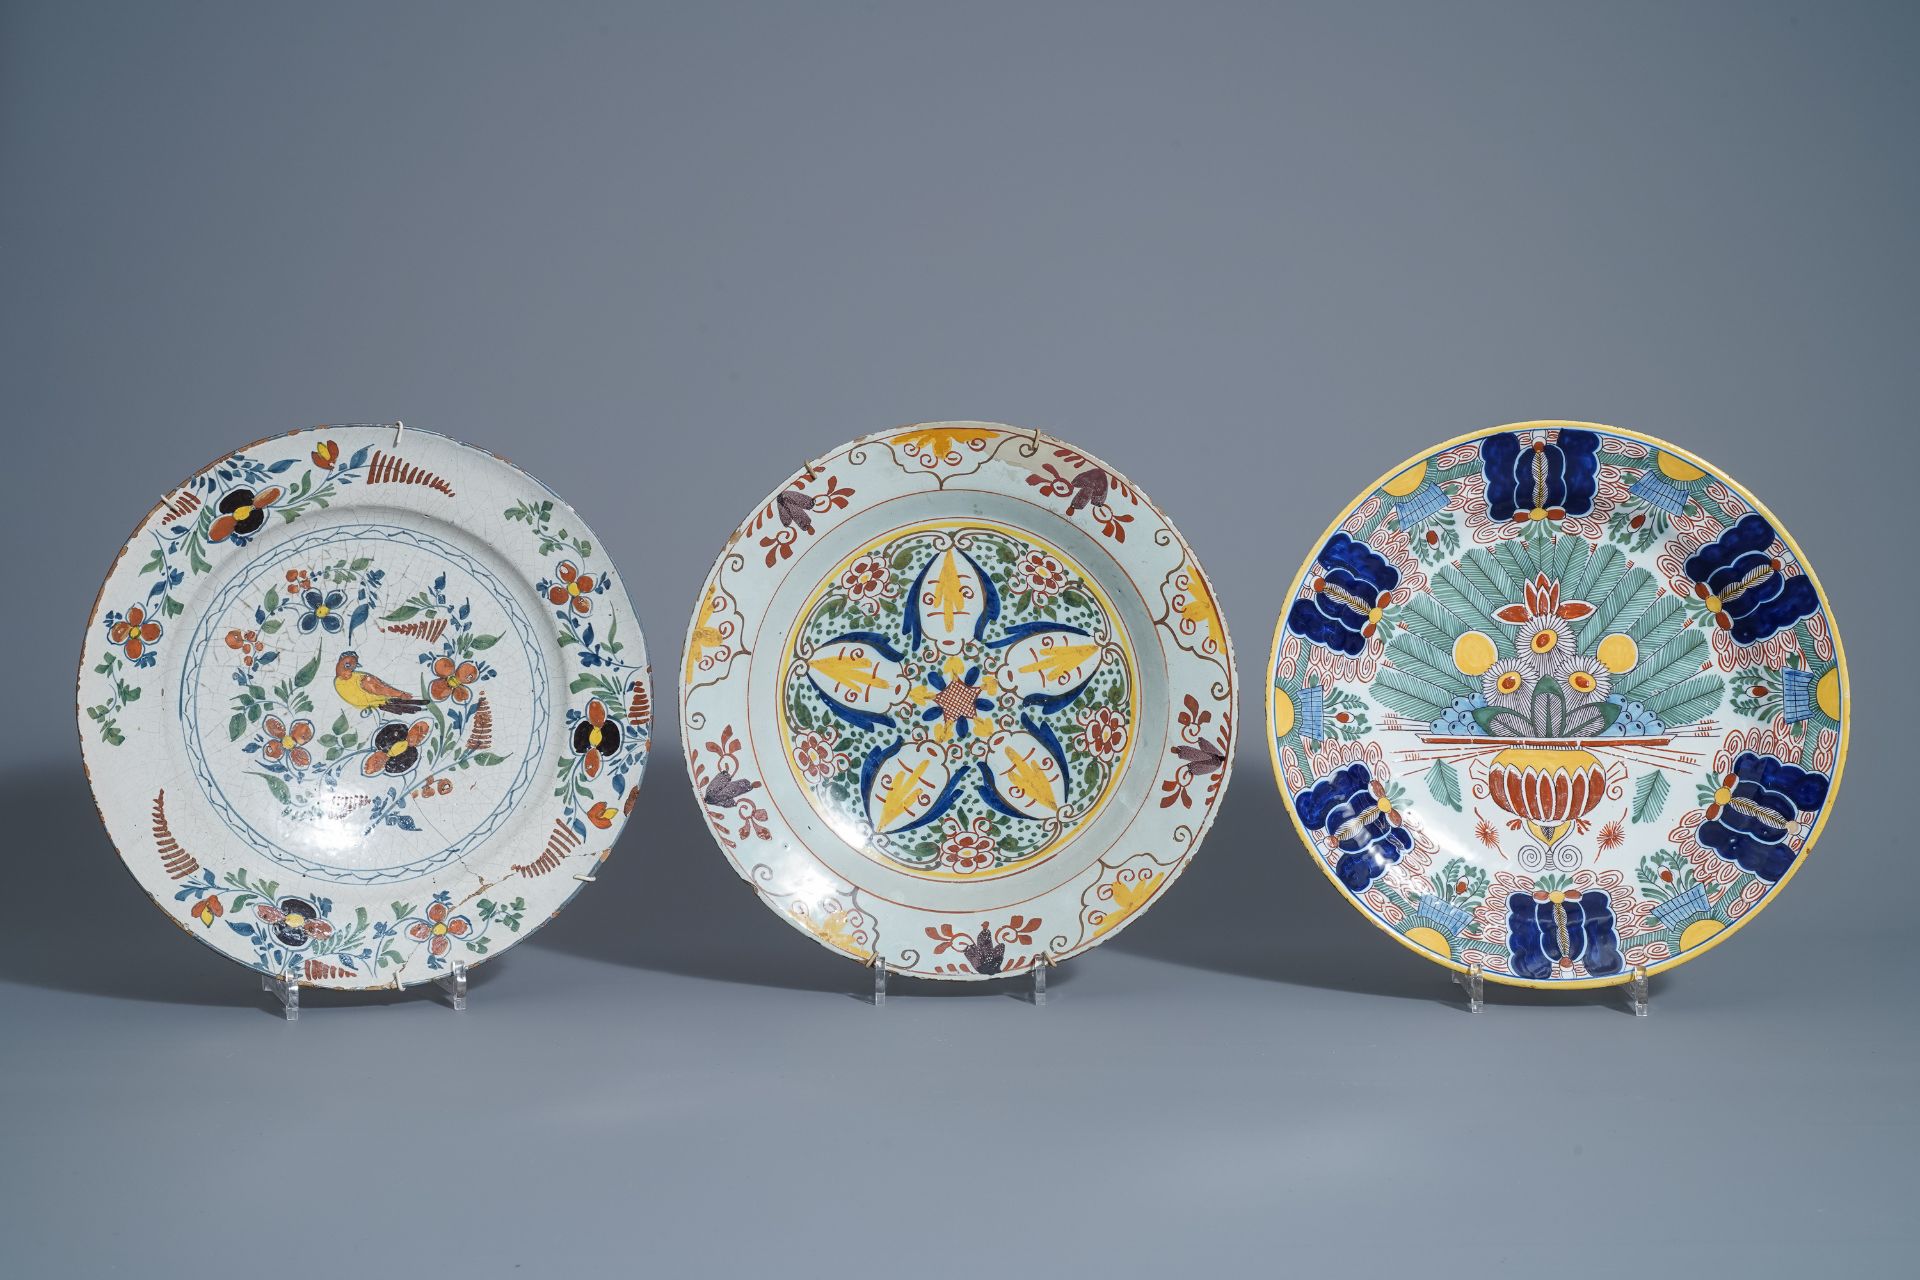 Twelve polychrome and blue and white Dutch Delft plates and an oval tray, 18th C. - Image 10 of 13